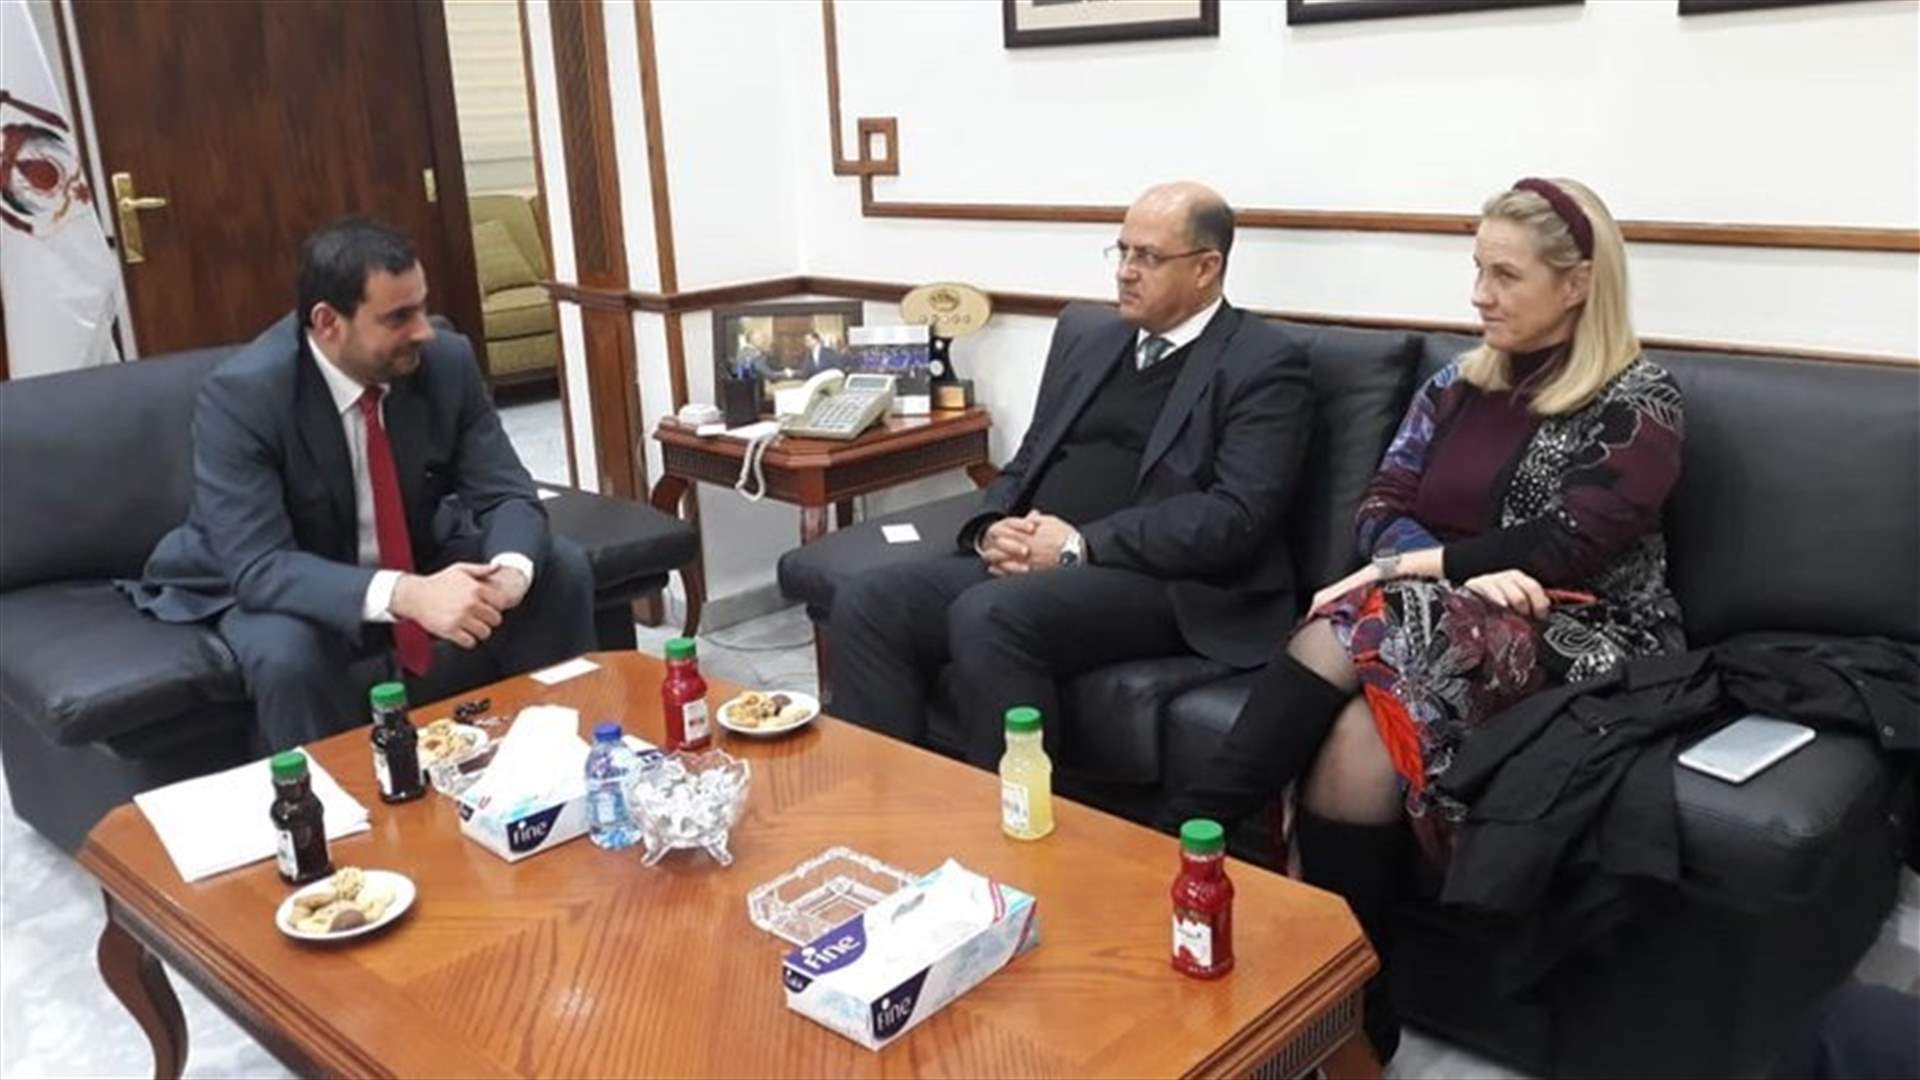 Agriculture Minister continues work visit to Jordan